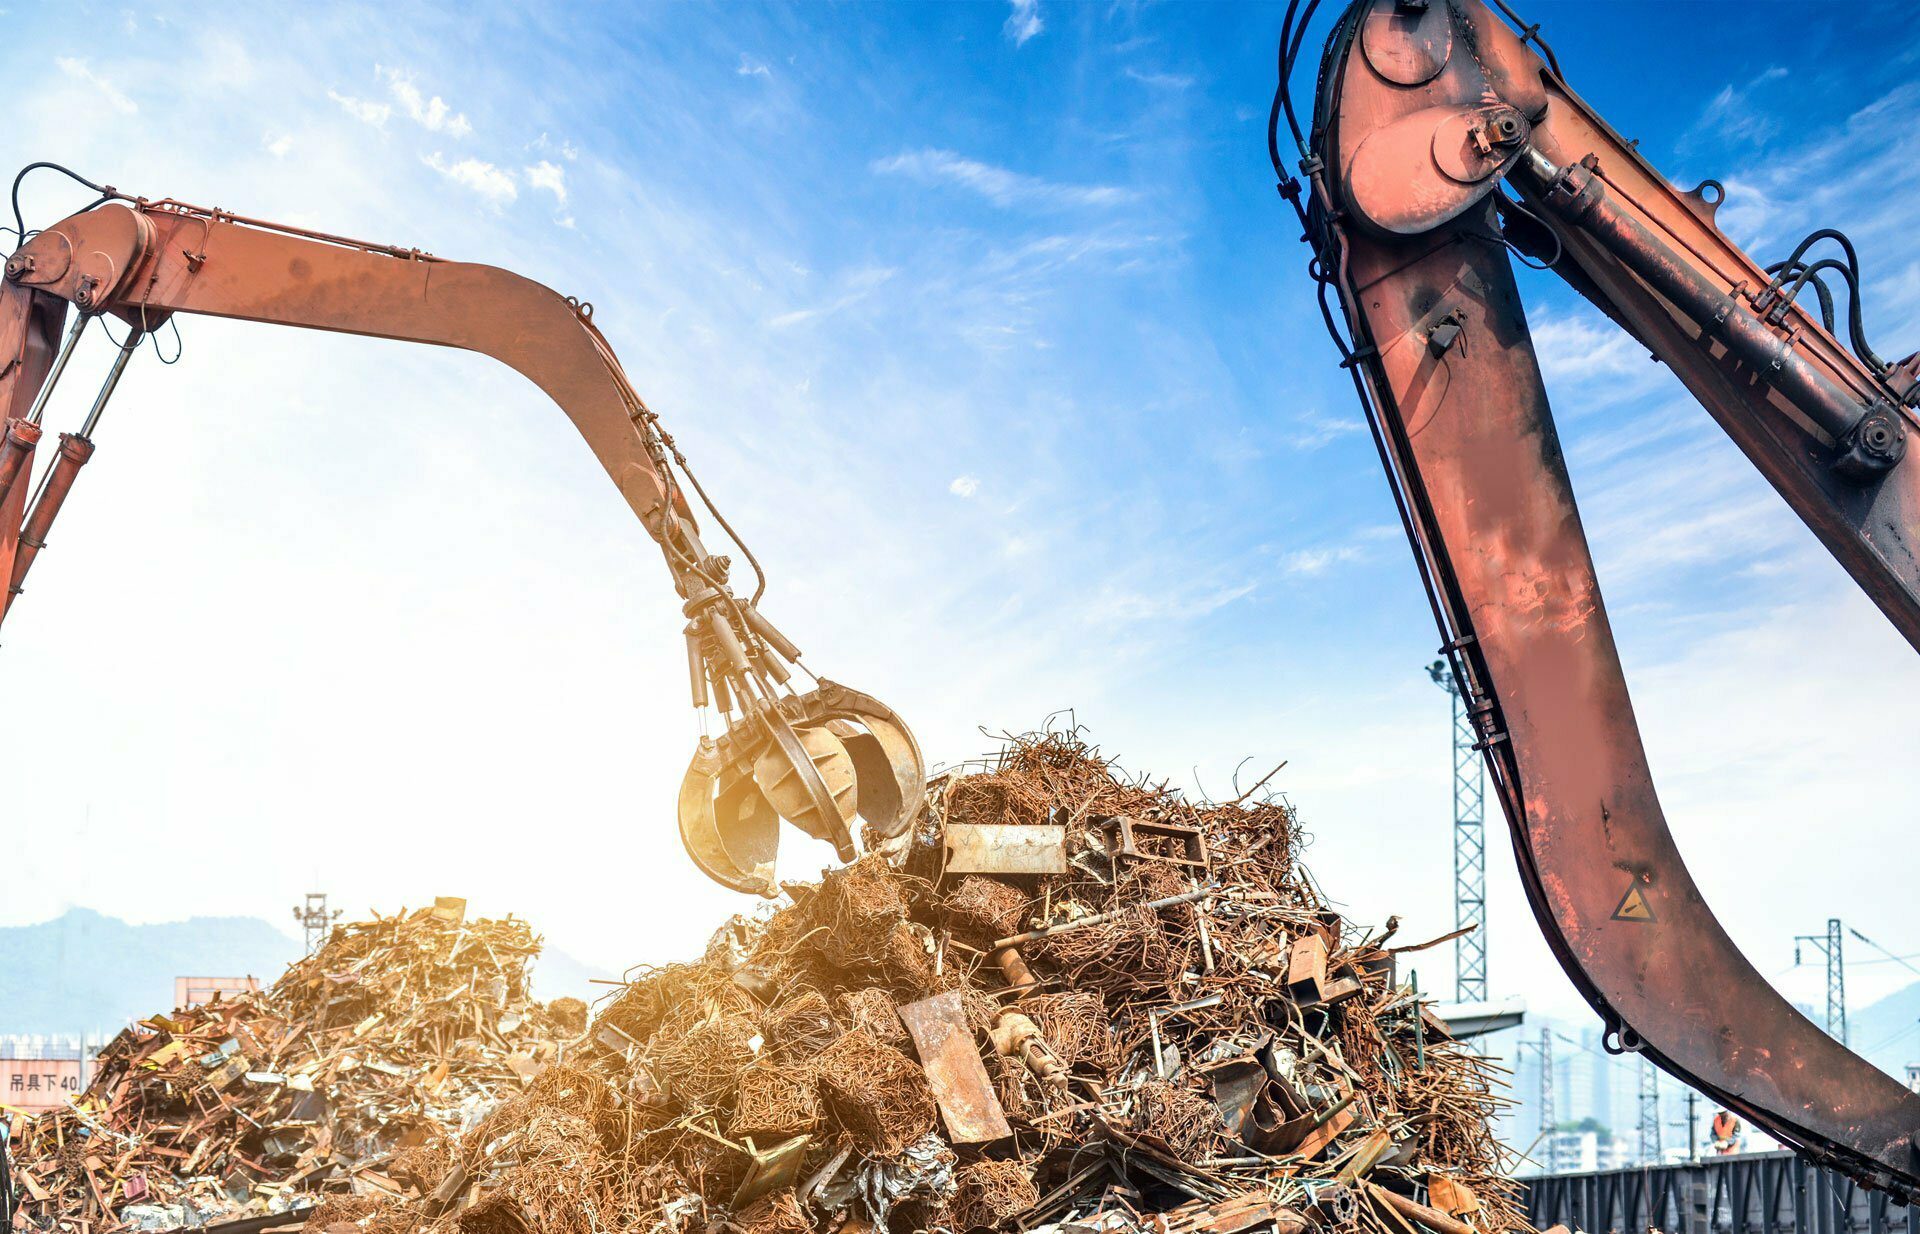 London's Trusted Scrap Metal Removal & Recycling Experts